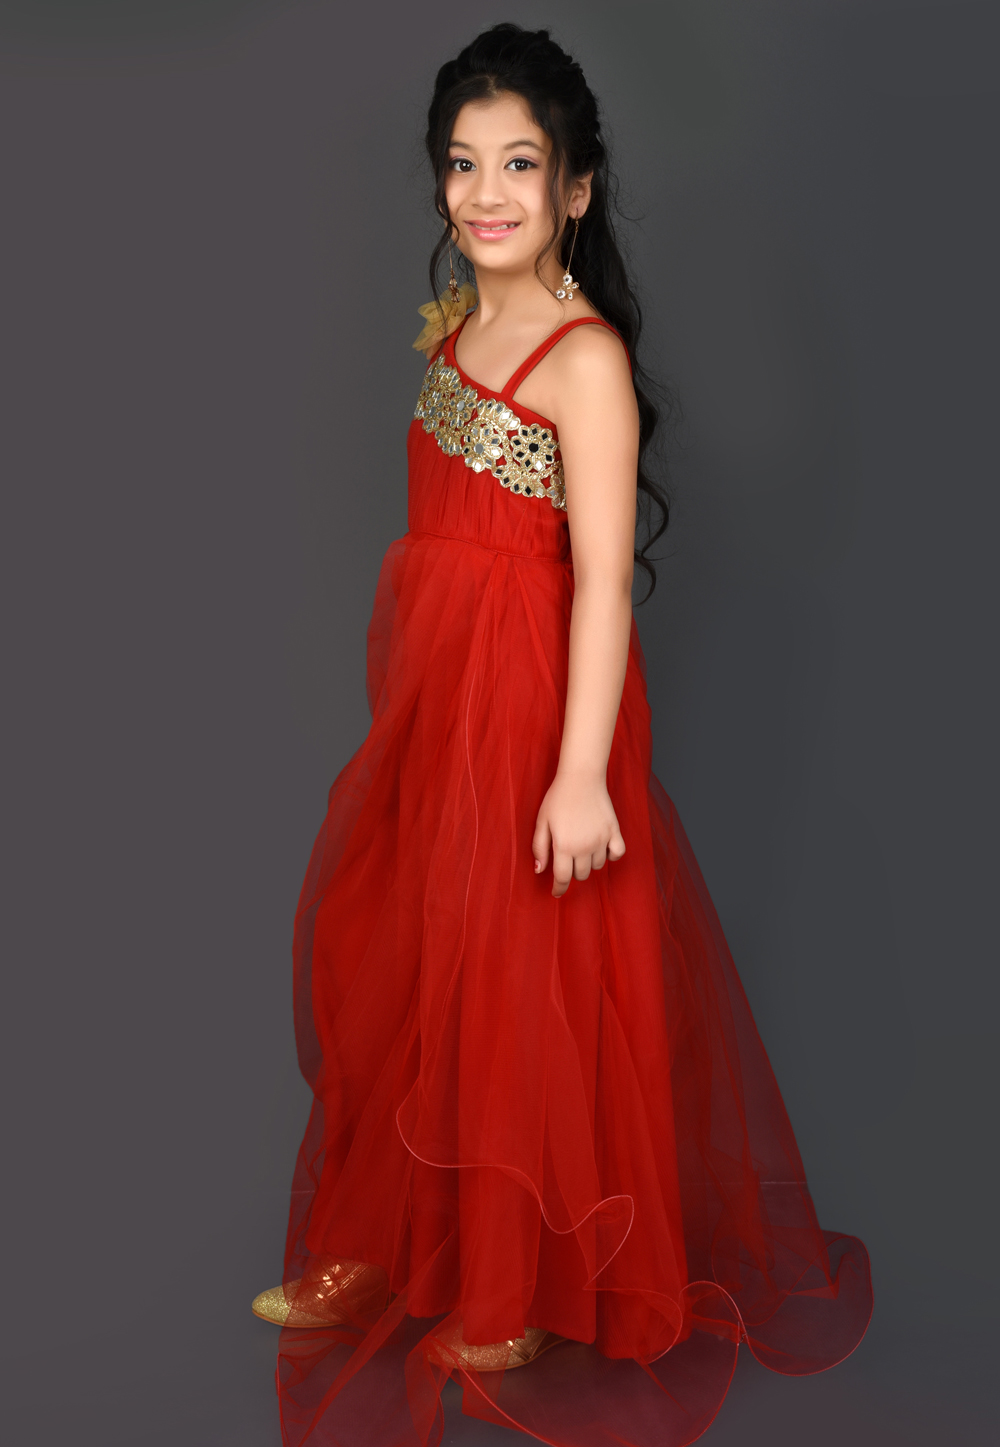 Red Lace Princess Girls Pageant Dress Long Sleeve Crystals Belt Ball Gown  Toddler Birthday Party Evening Gowns Kids Prom Dresses Custom From 42,42 €  | DHgate